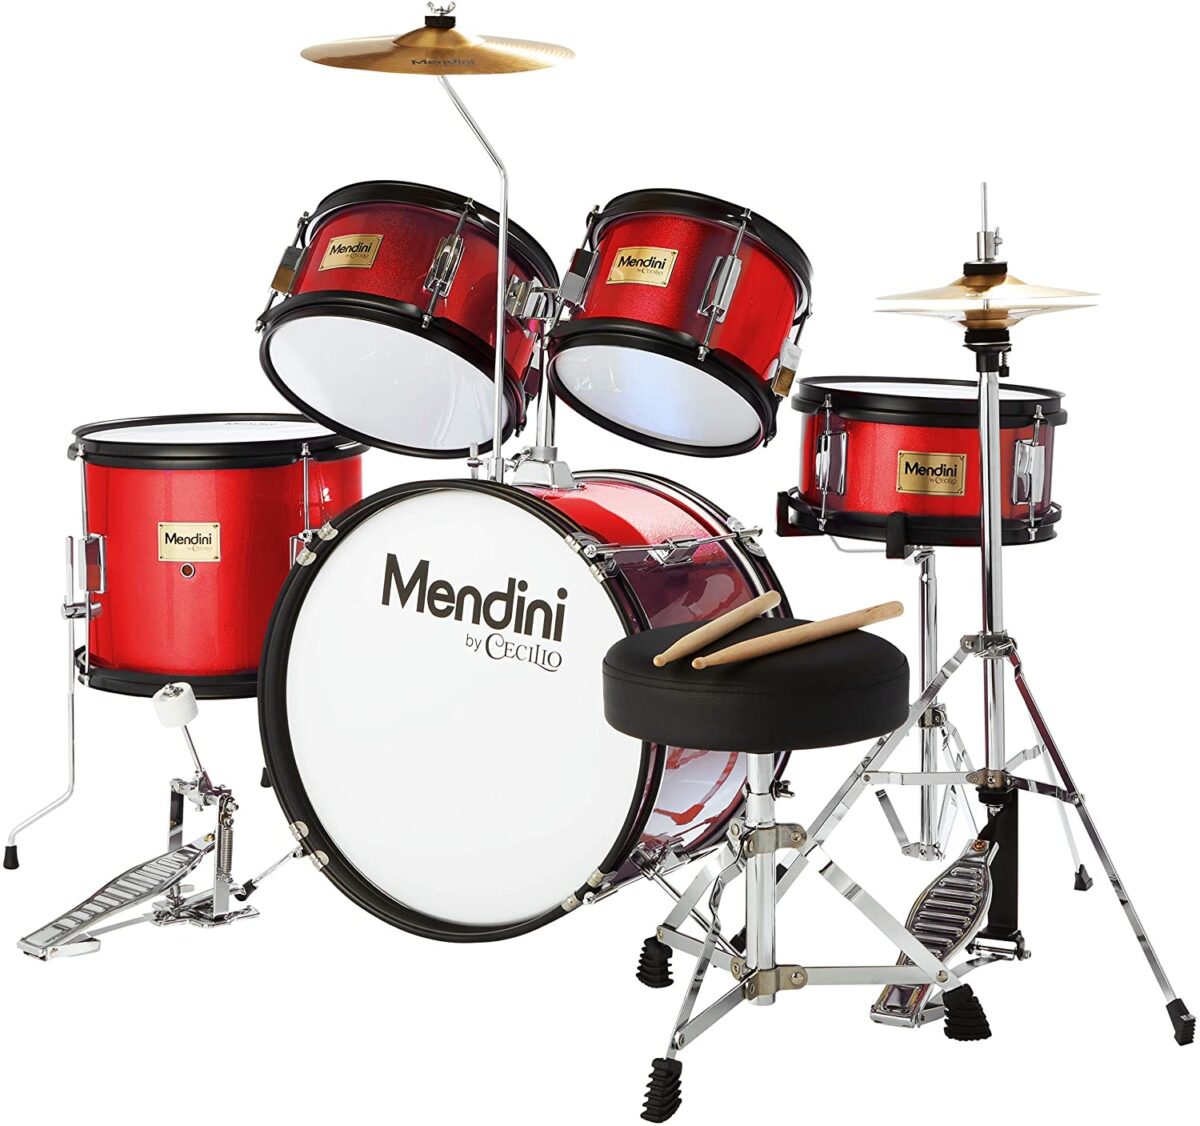 Best Drum Kits Under 1000: Now Gift Yourself or Your Loved Ones the Love of Drumming